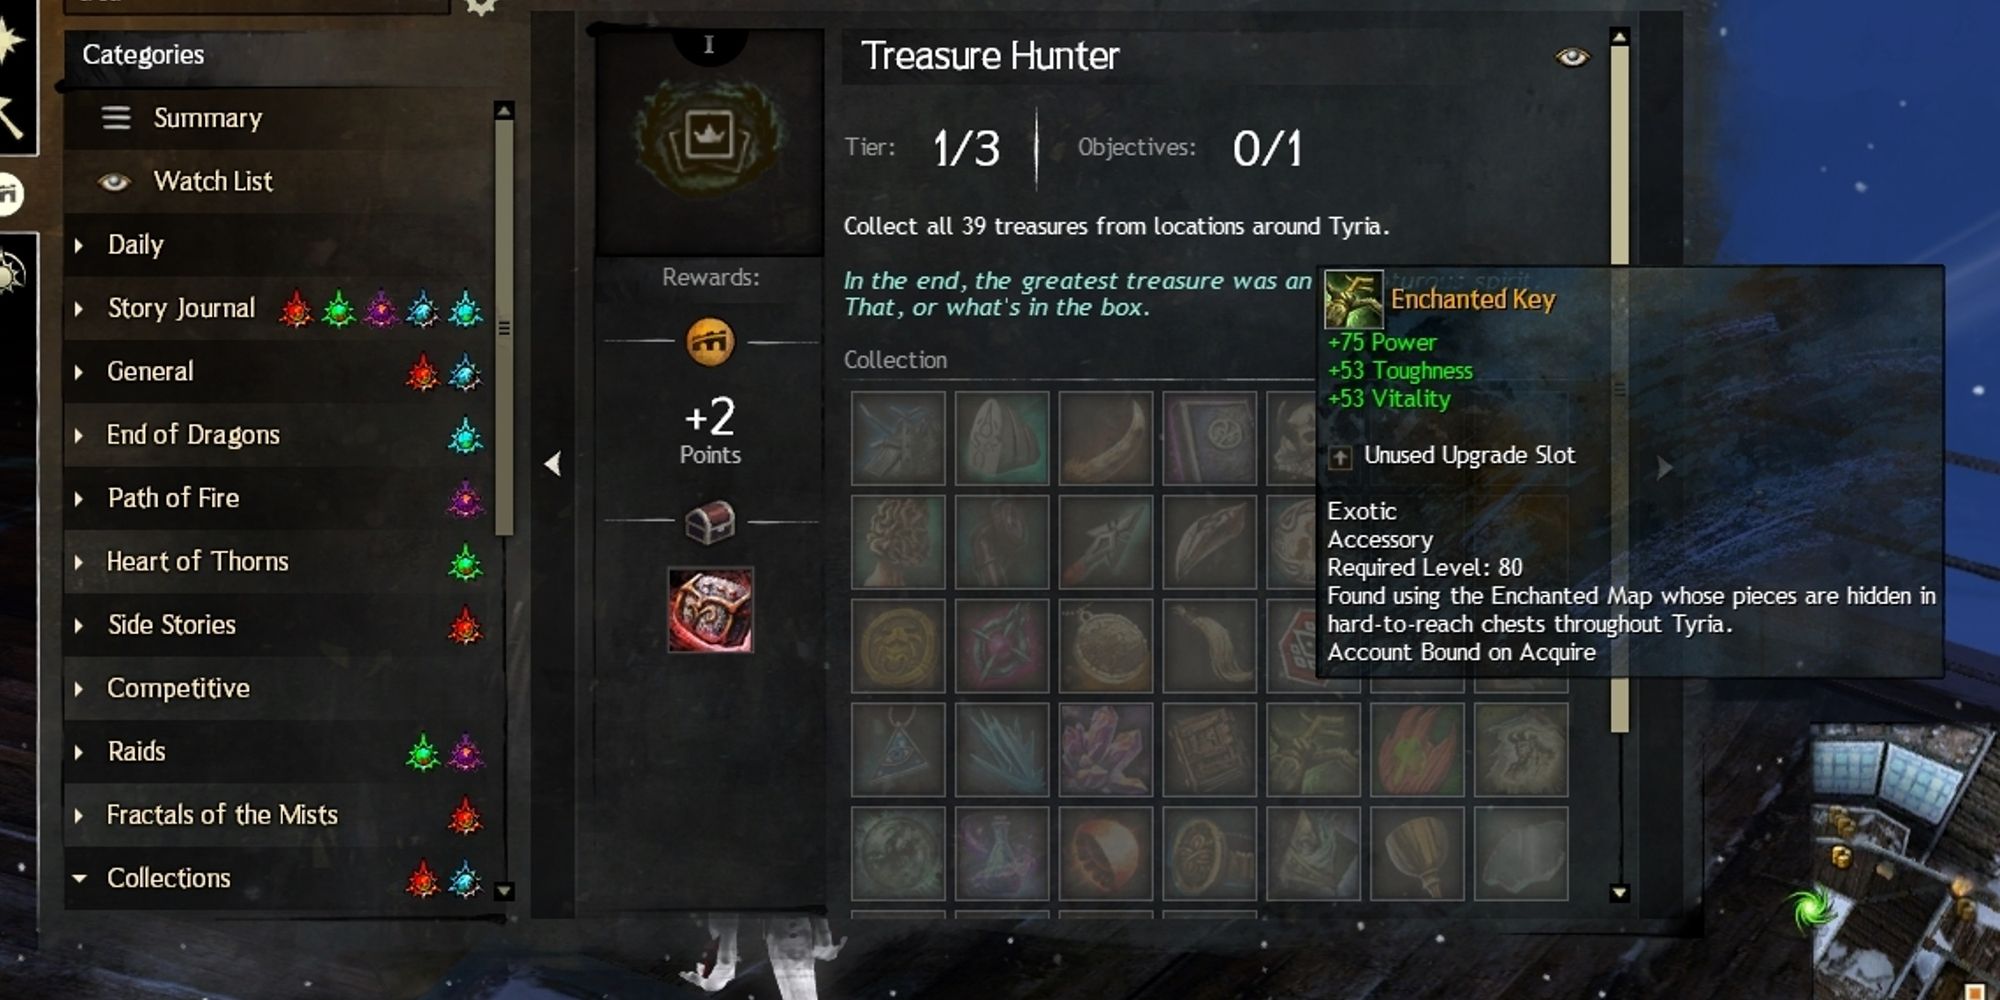 treasure hunter achievement with enchanted key highlighted